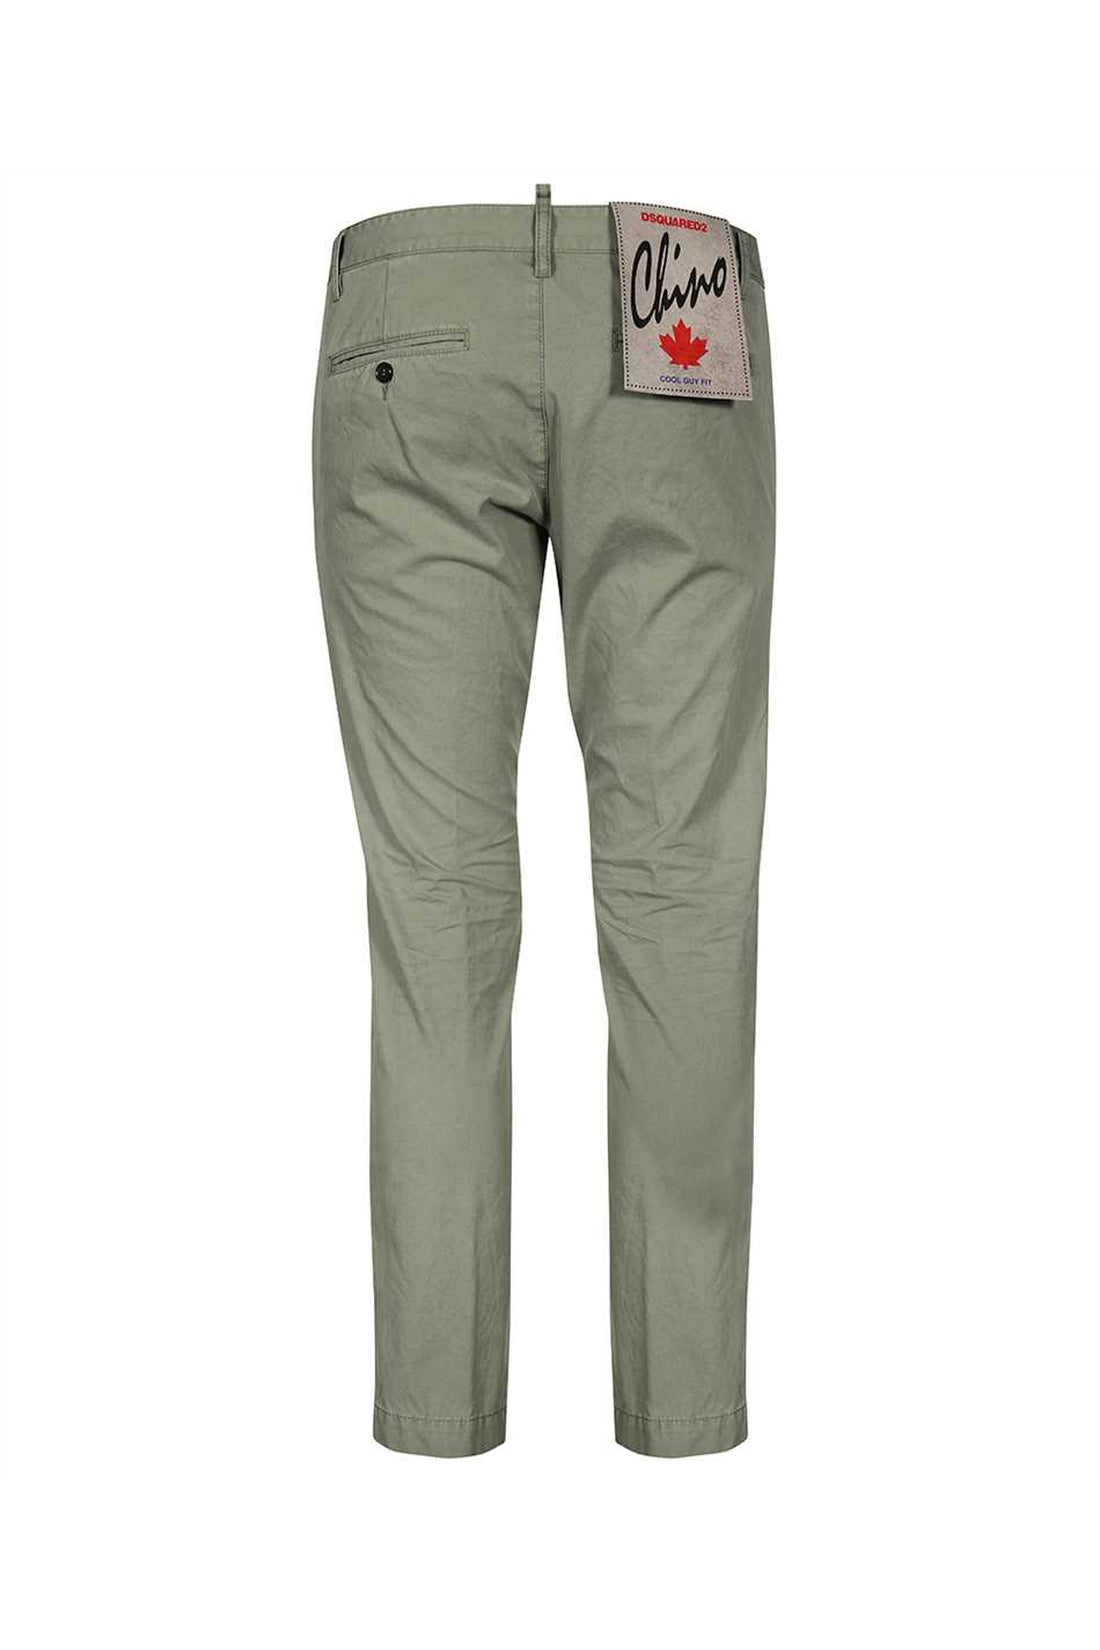 Dsquared2-OUTLET-SALE-Cotton Chino trousers-ARCHIVIST